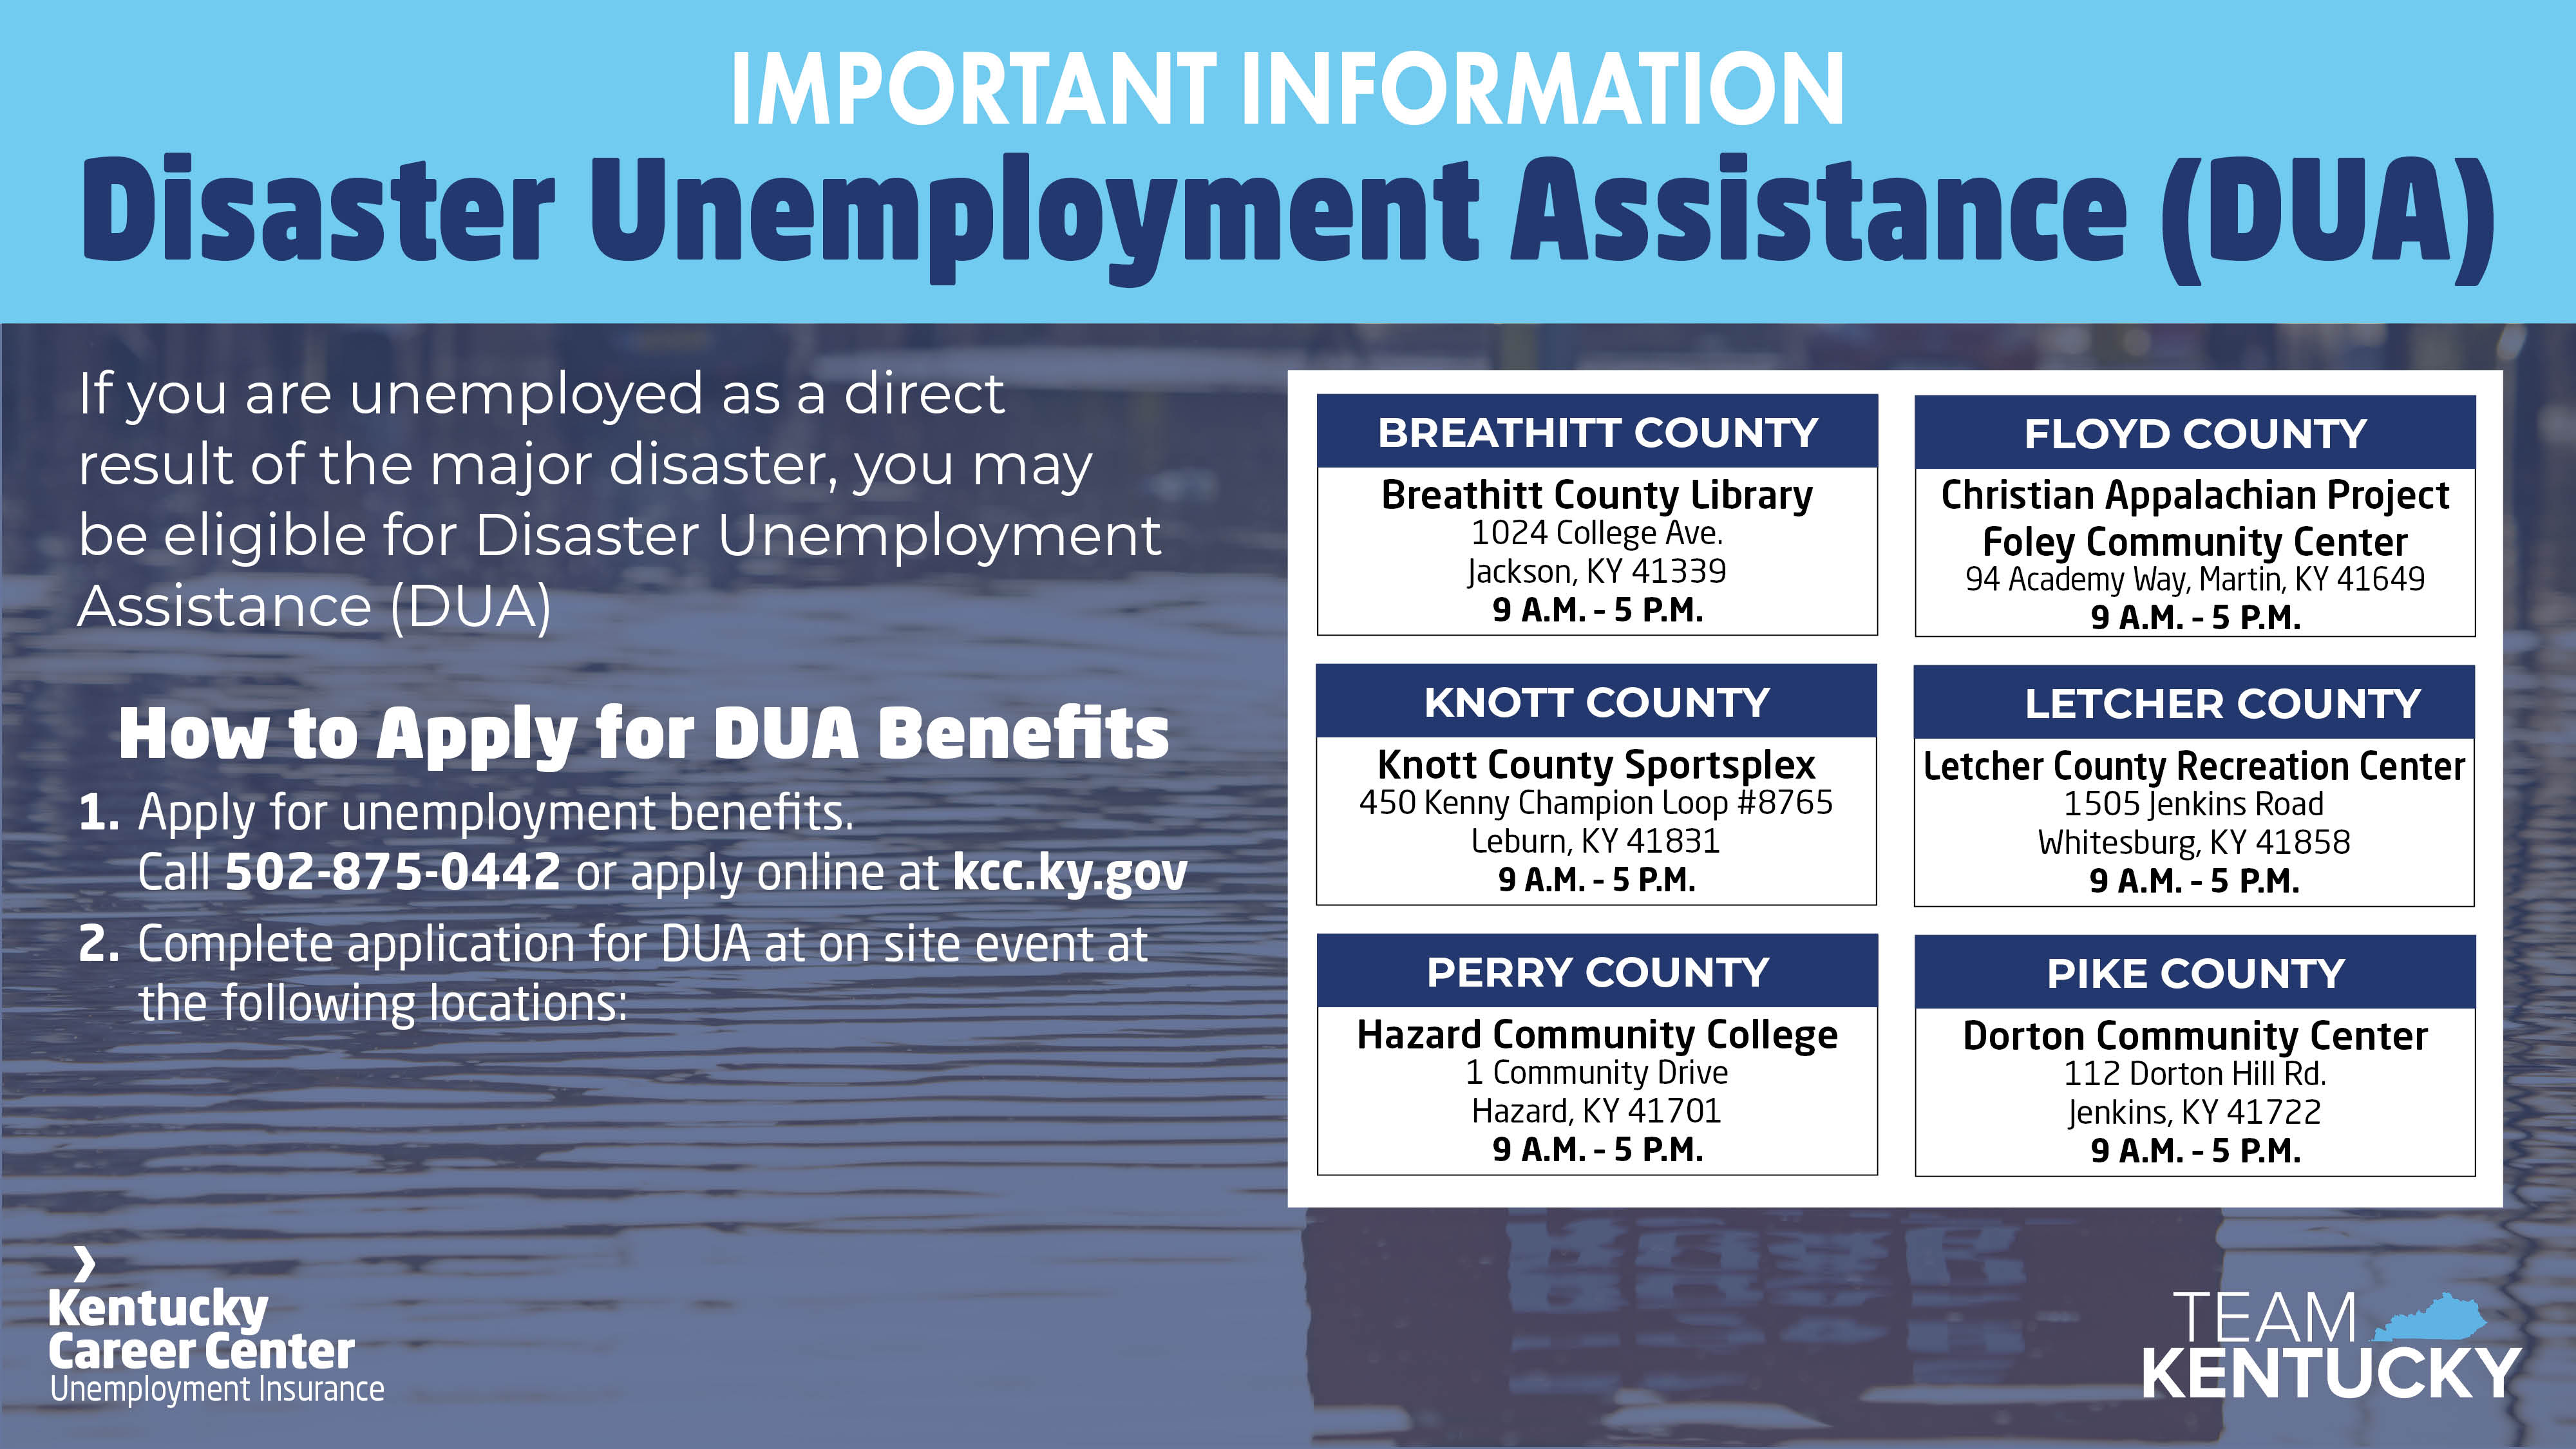 UPDATED: DUA claimants - get help with applications at the following Eastern Kentucky locations: 